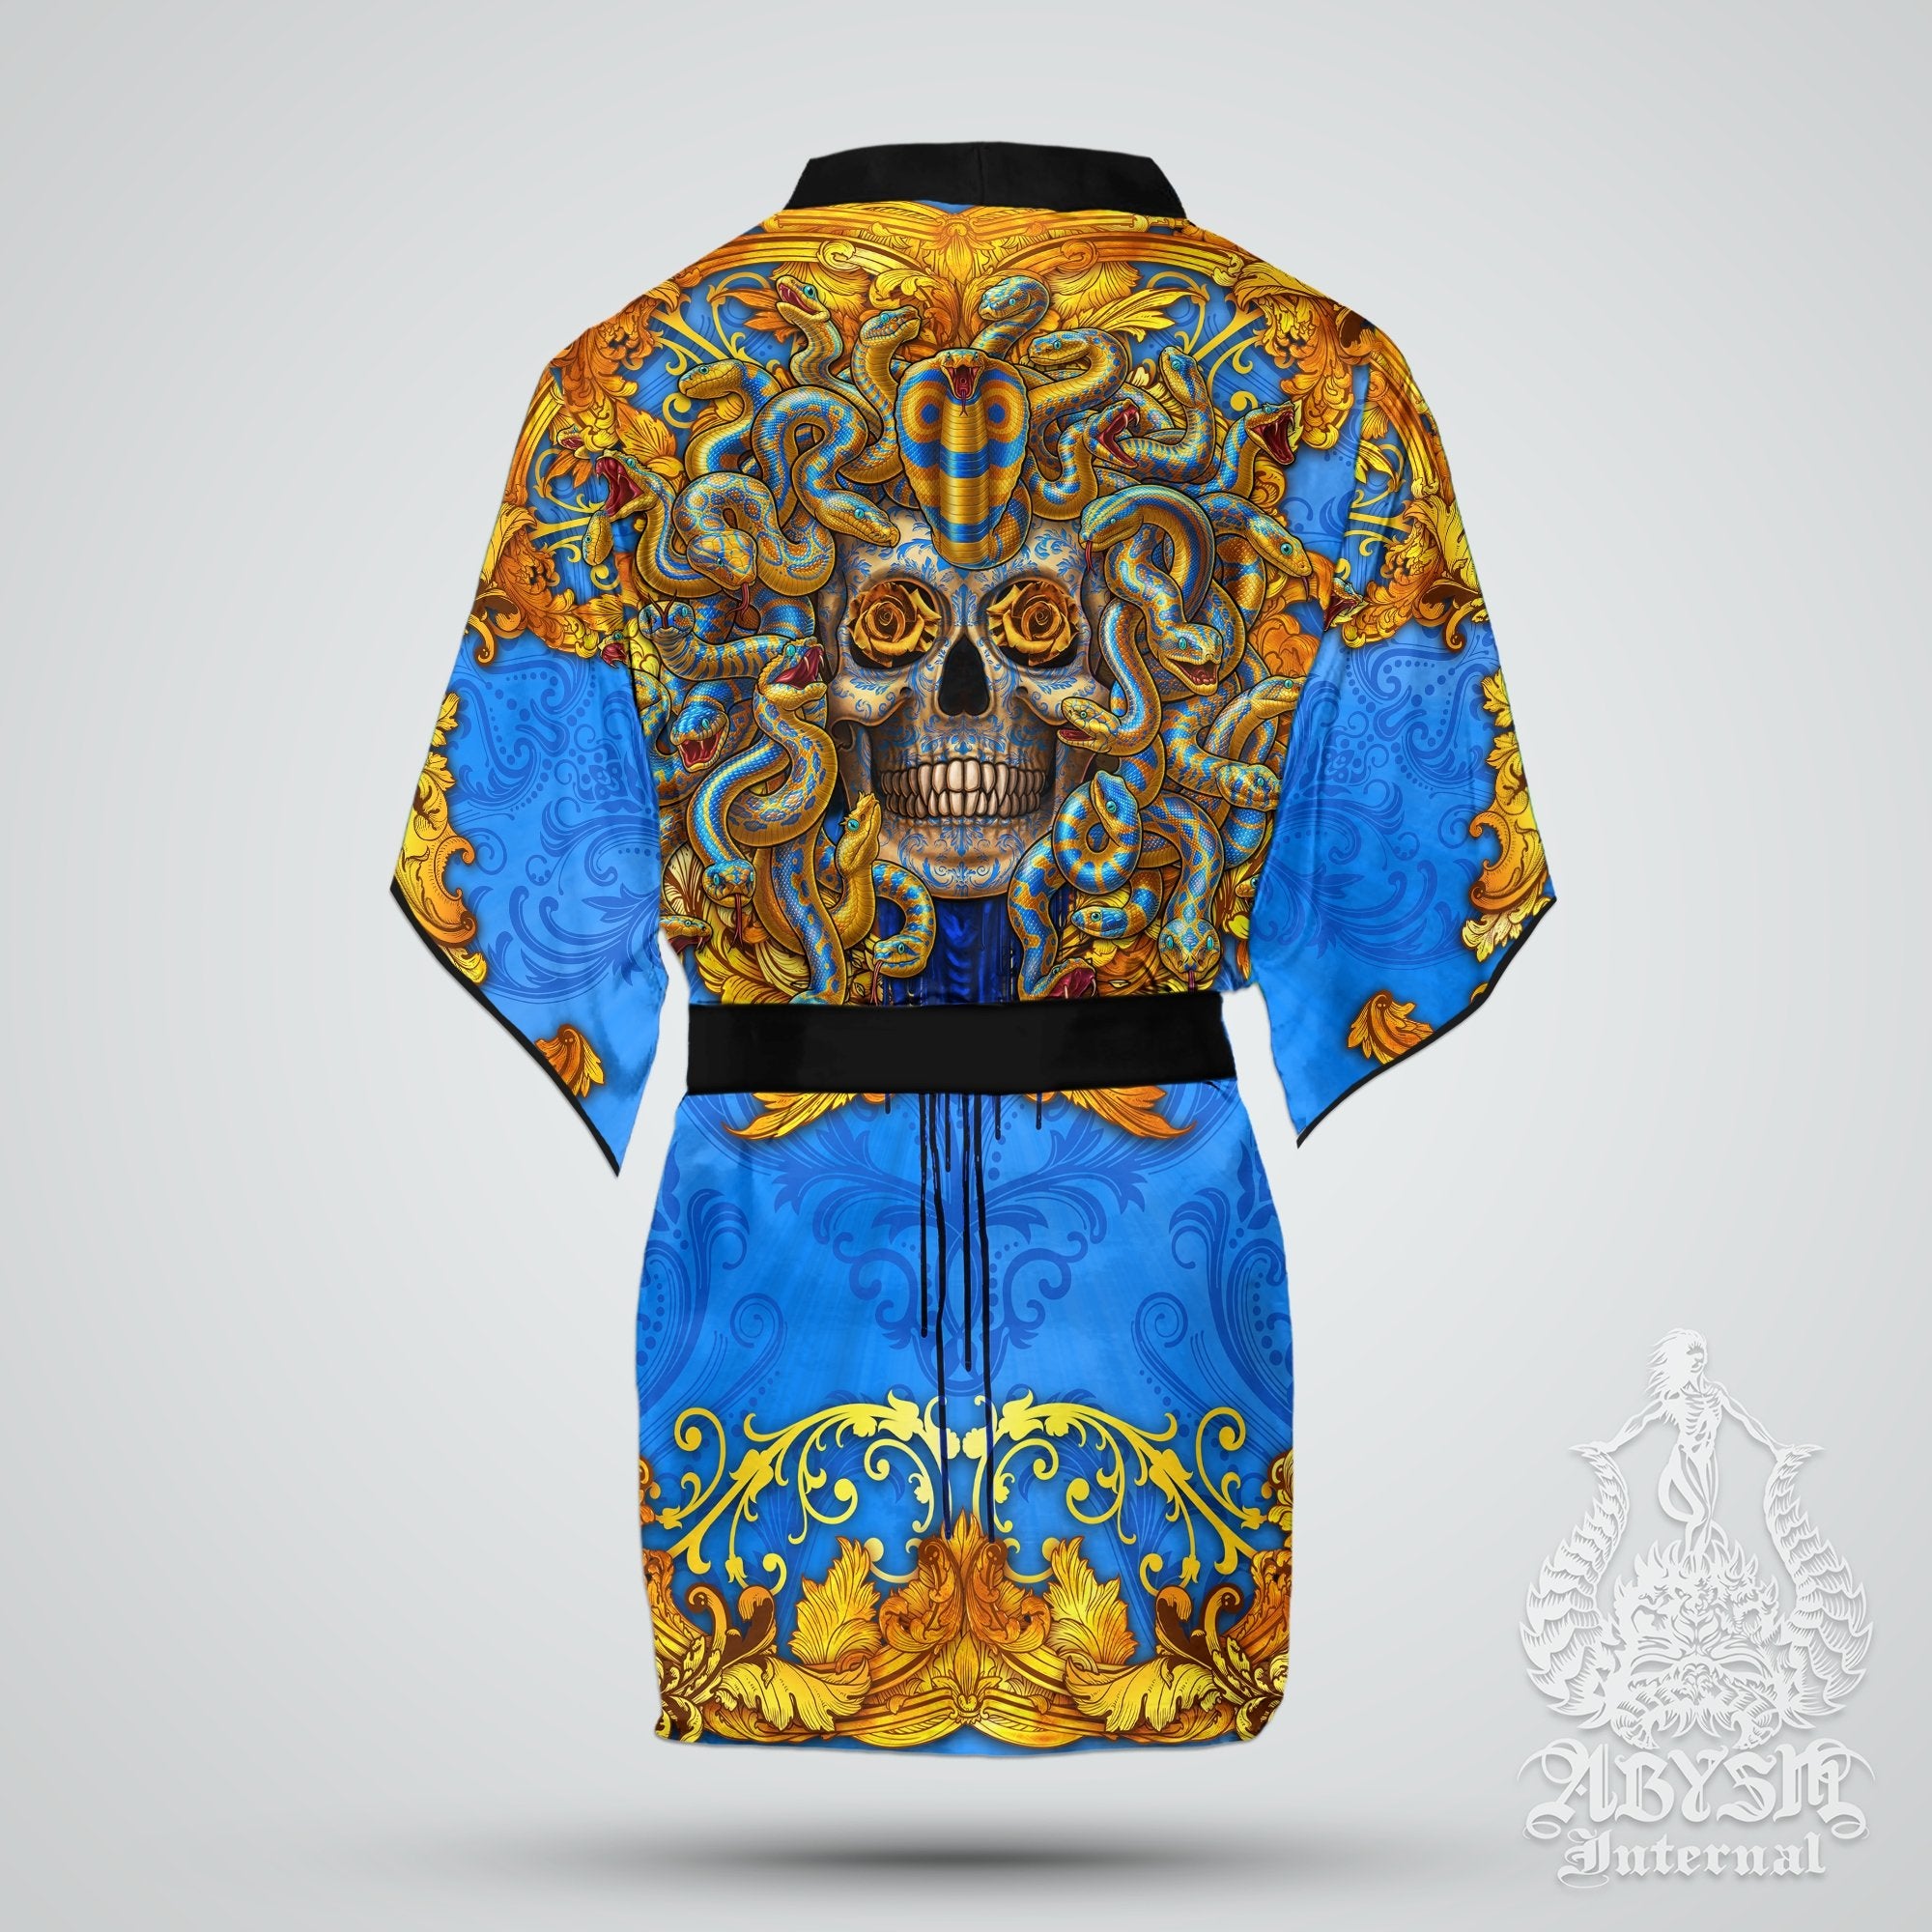 Medusa Skull Cover Up, Beach Outfit, Party Kimono, Summer Festival Robe, Indie and Alternative Clothing, Unisex - Cyan Gold - Abysm Internal